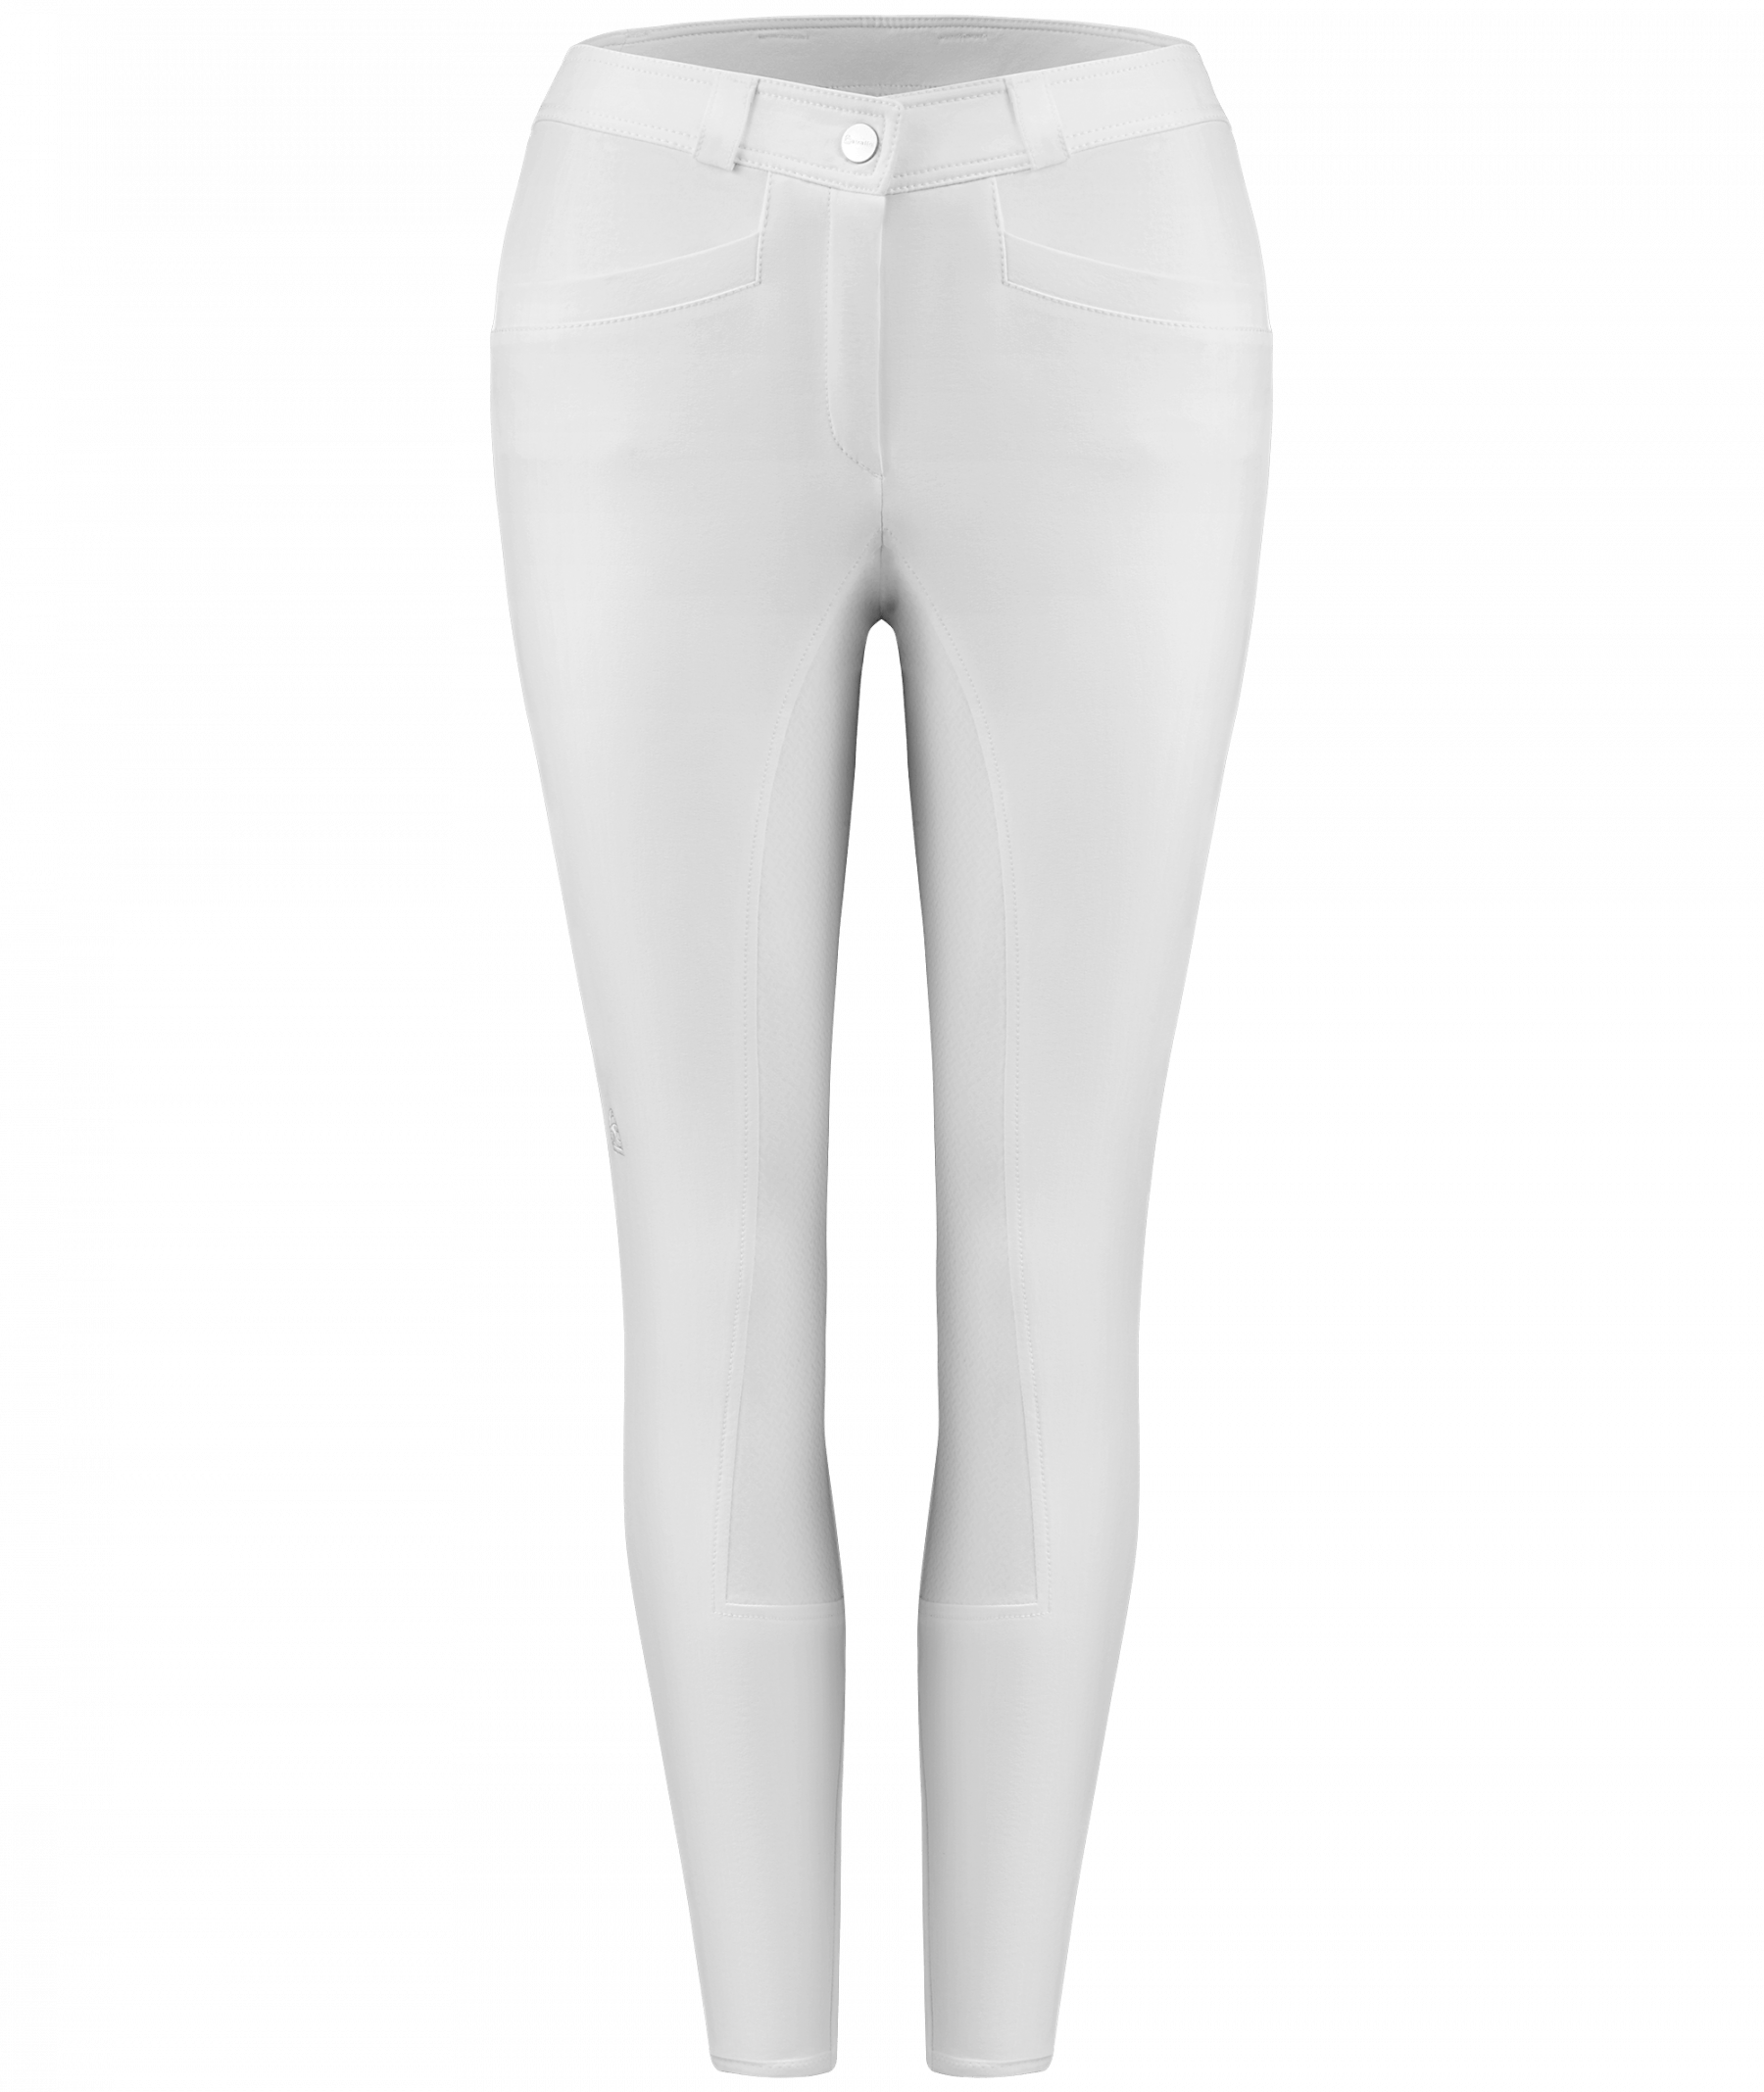 Pants clipart article clothing, Pants article clothing Transparent FREE ...